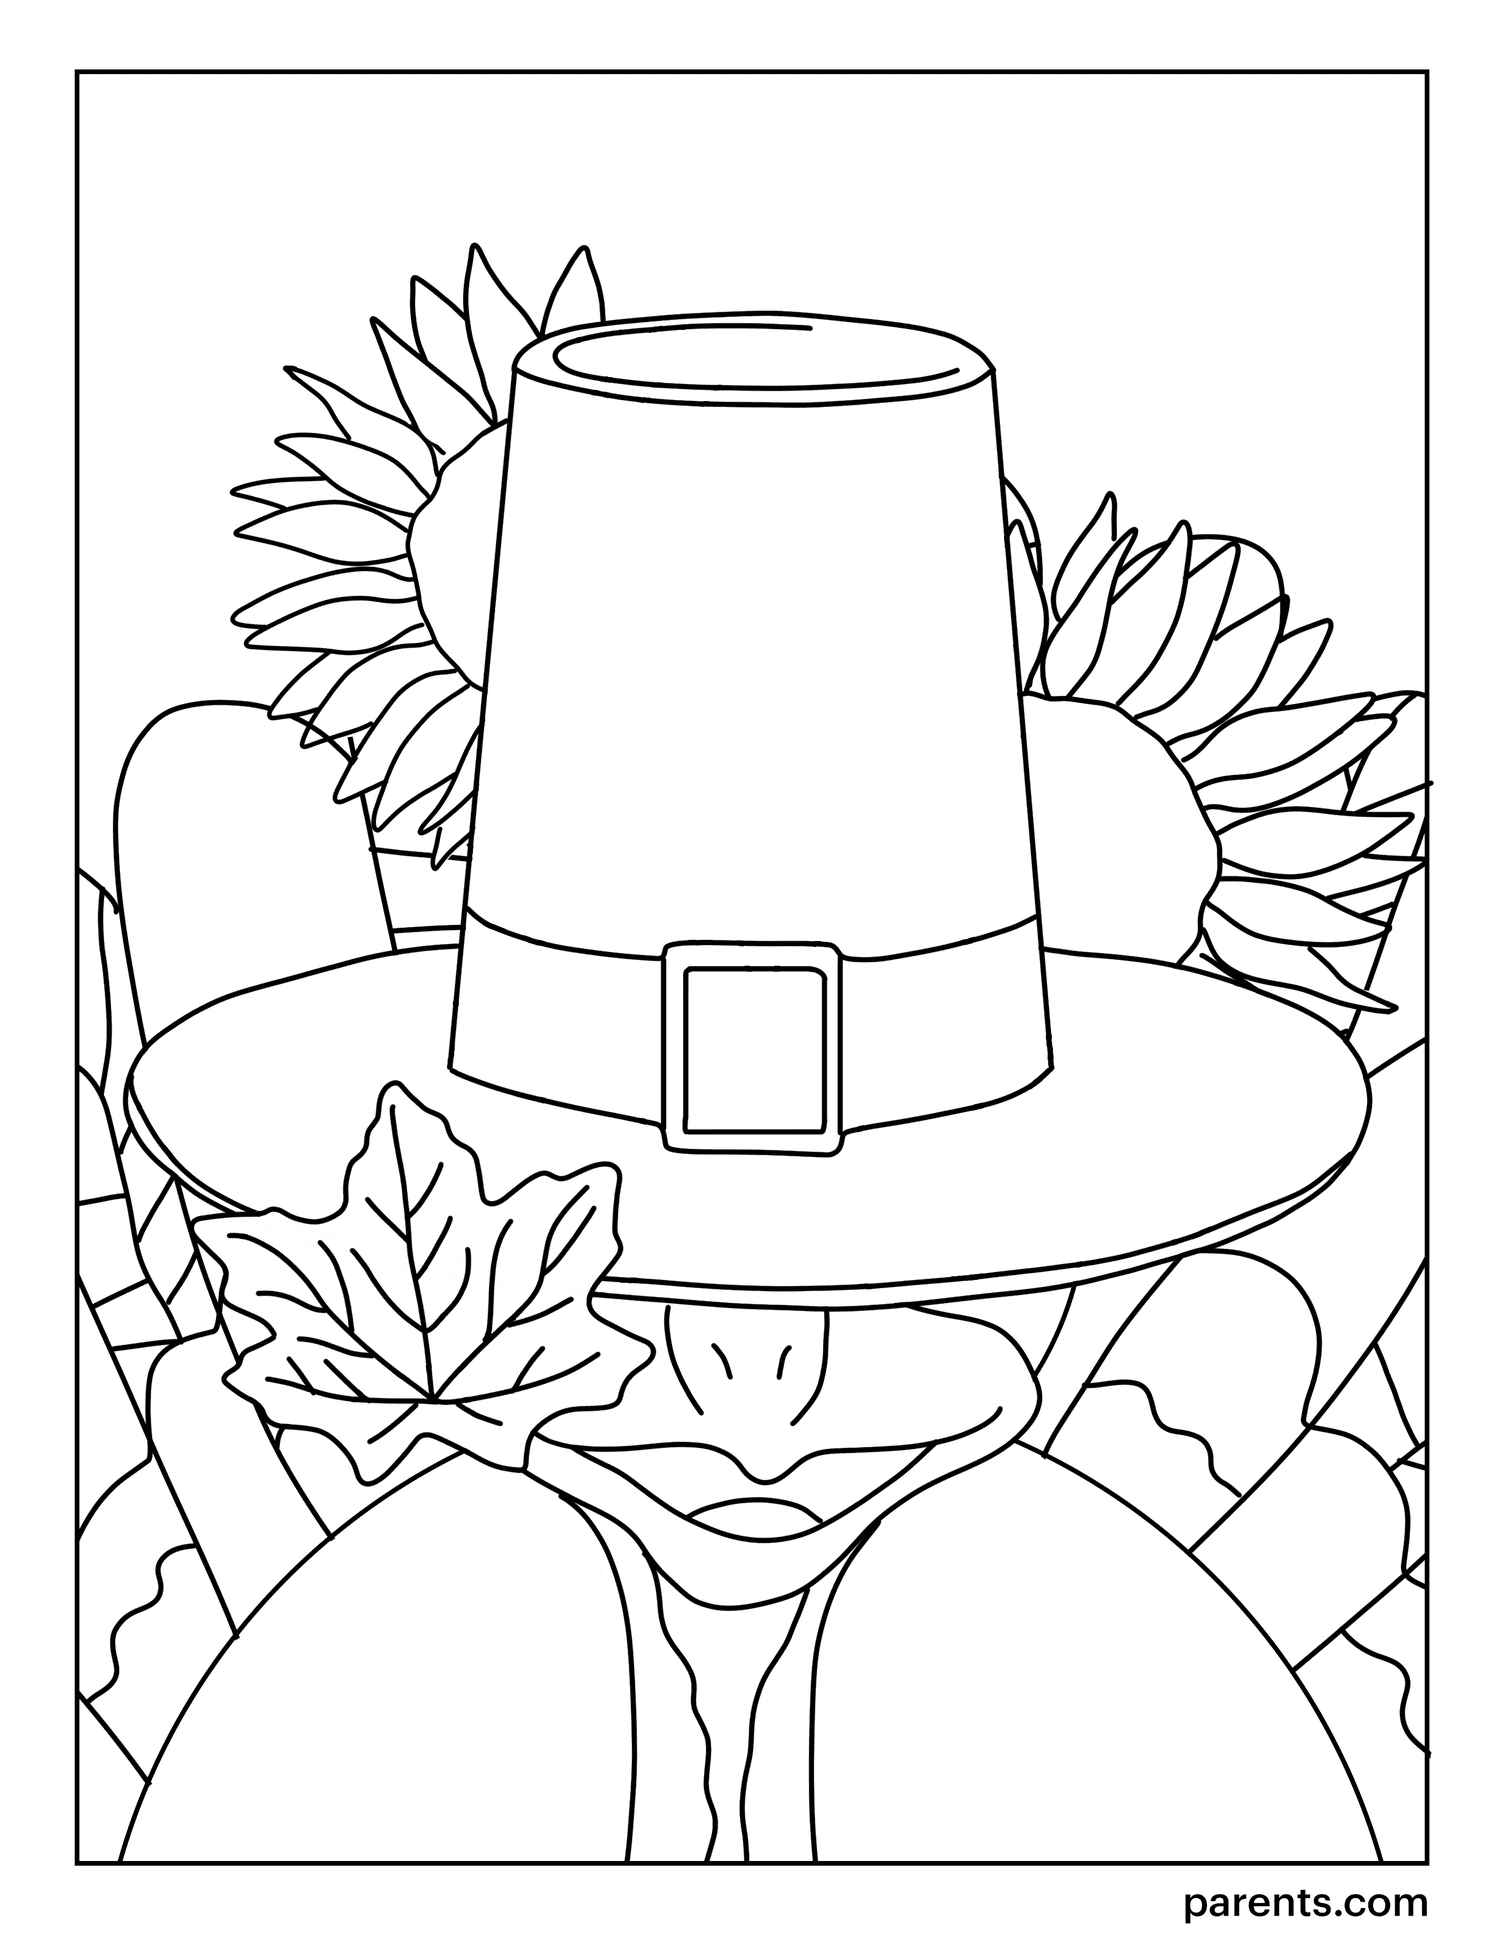 Turkey Coloring Pages to Print for Thanksgiving  Parents